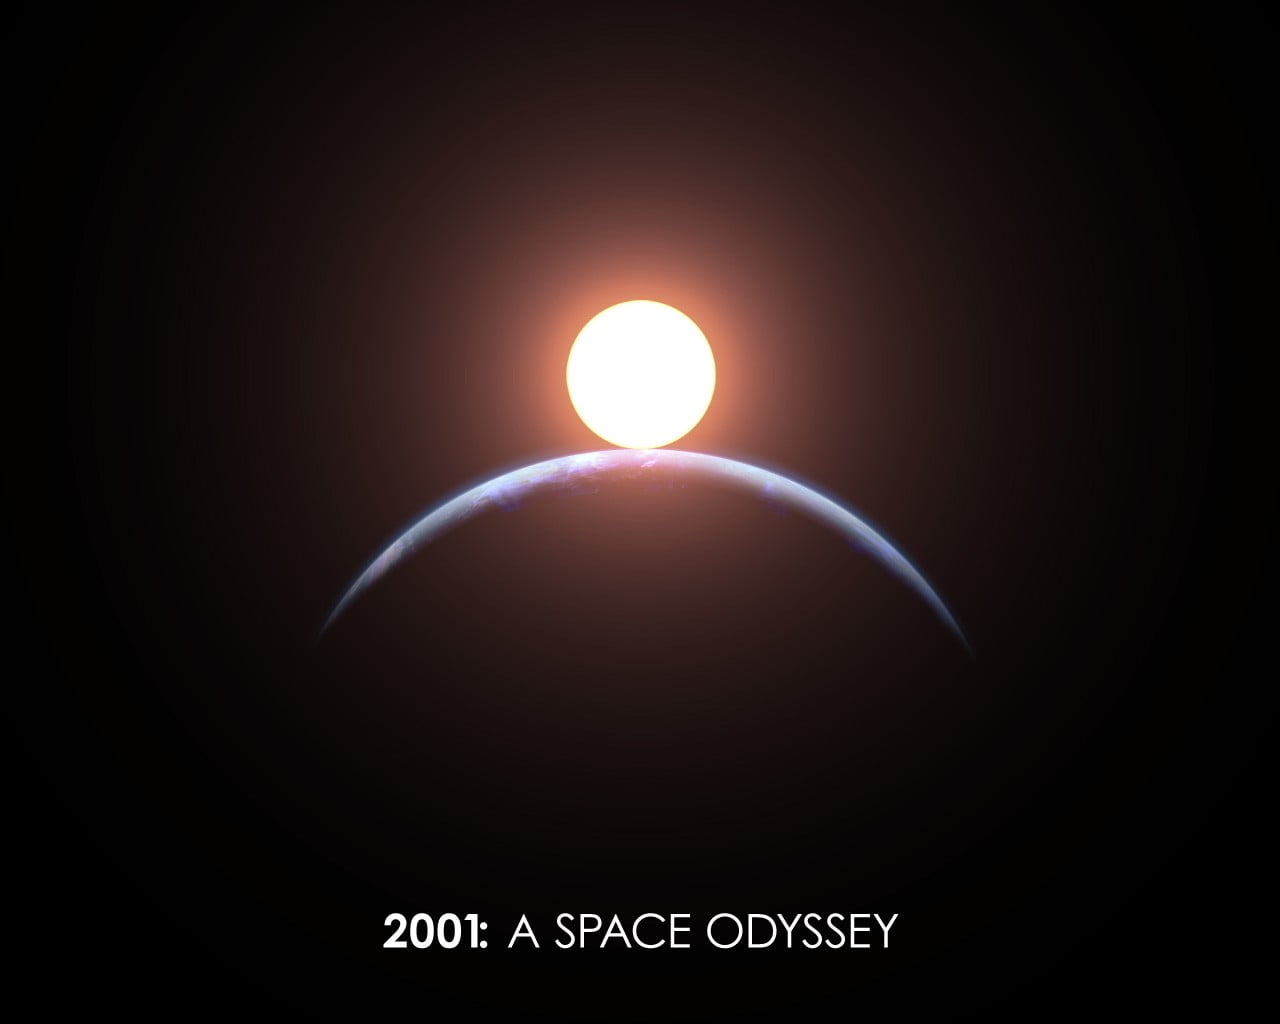 2001: A Space Odyssey text overlay on black background, 2001: A Space Odyssey, movies